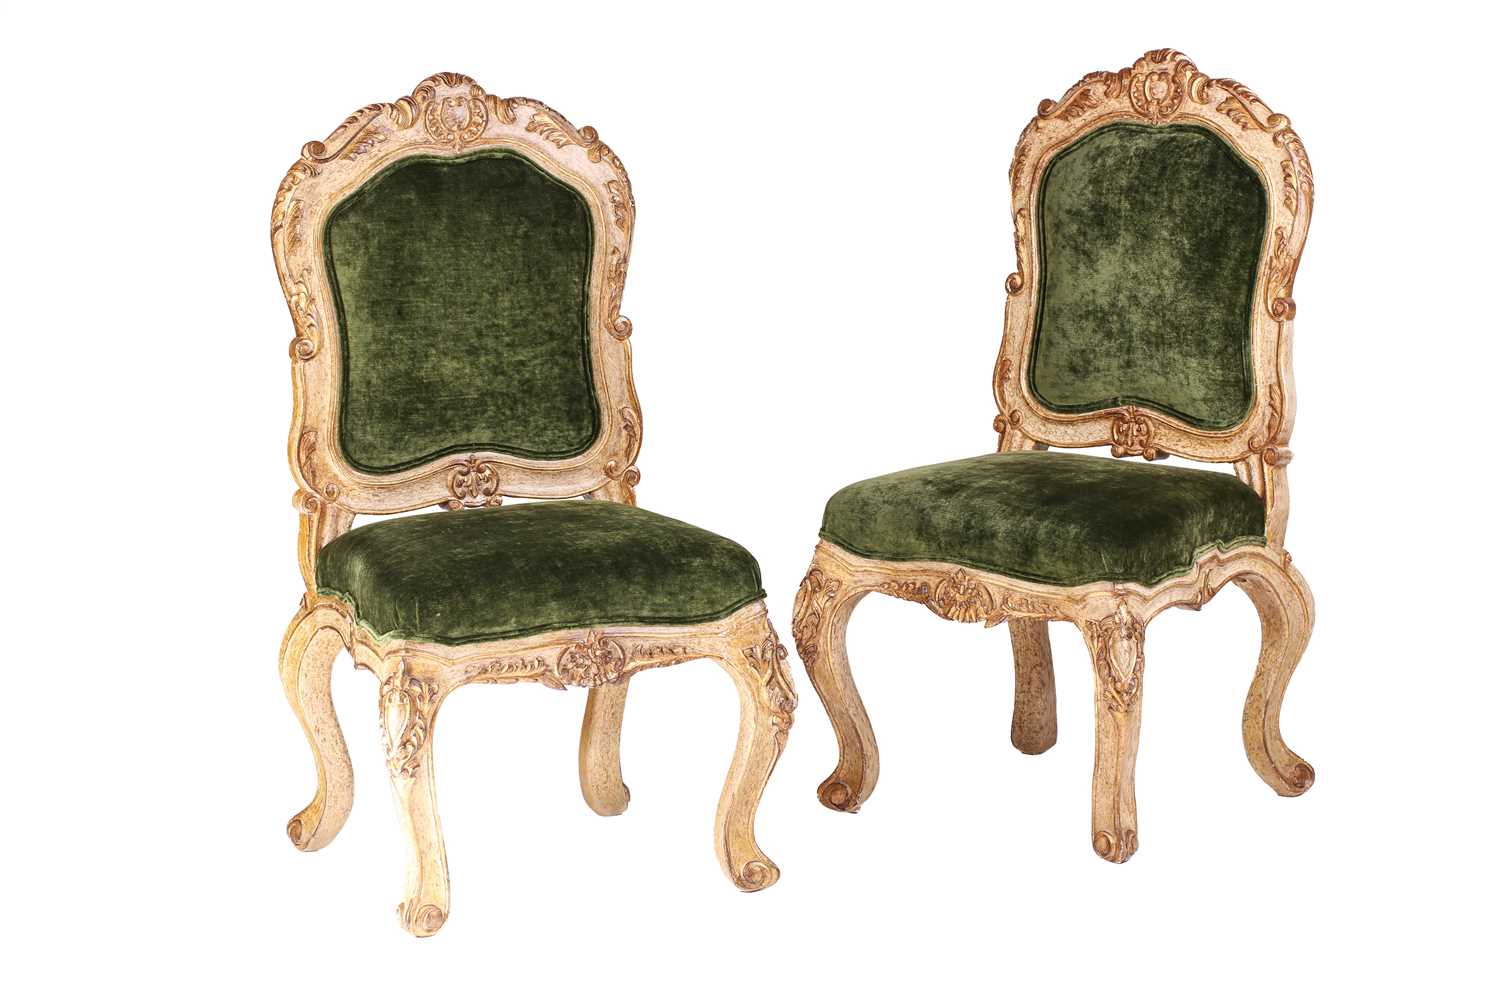 A set of large Mexican French-style painted and giltwood side chairs, 20th century with stuff over - Image 2 of 9